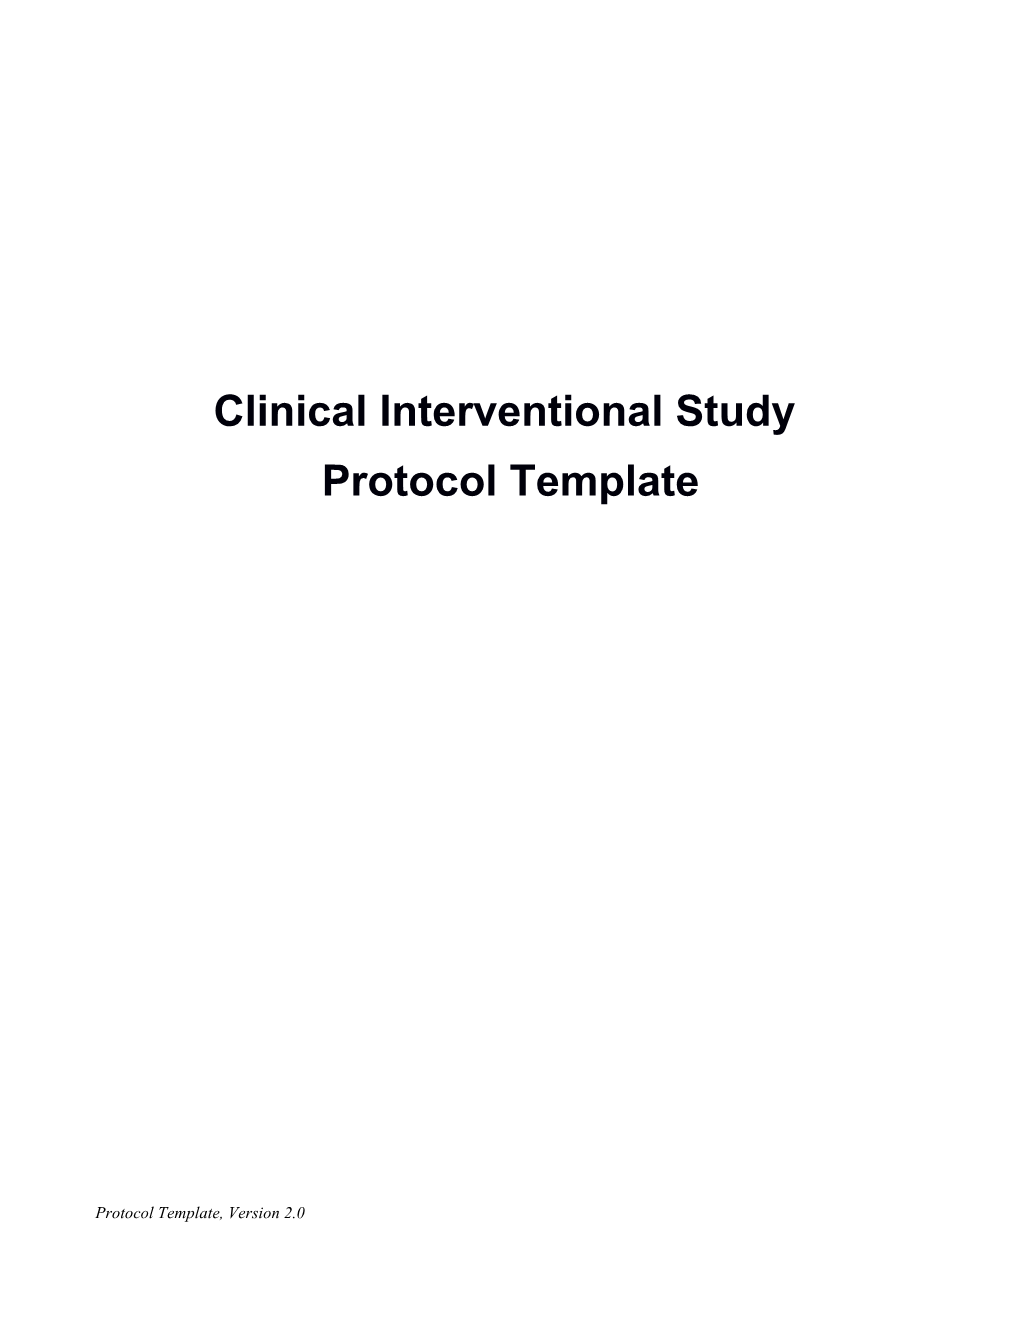 Clinical Interventional Study Protocol Template